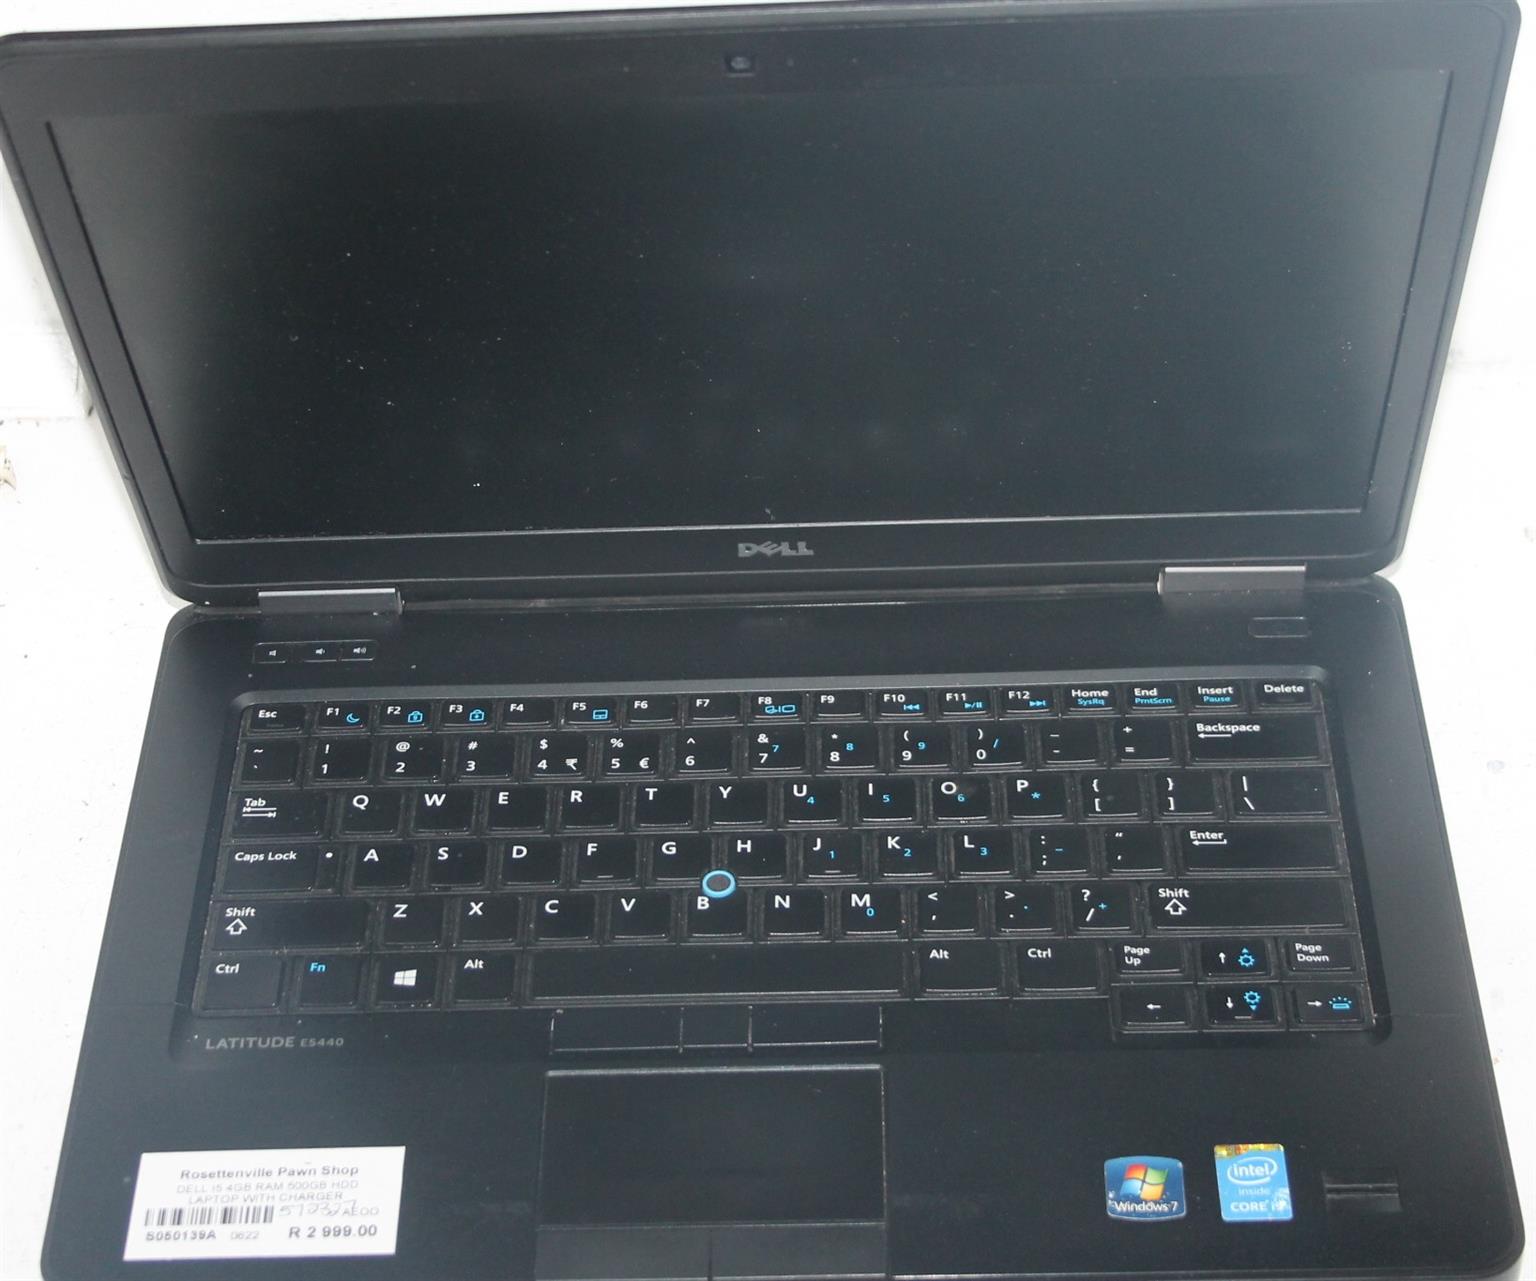 Dell i5 4GB RAM 500GB HDD Laptop with charger S050139A #Rosettenvillepawnshop